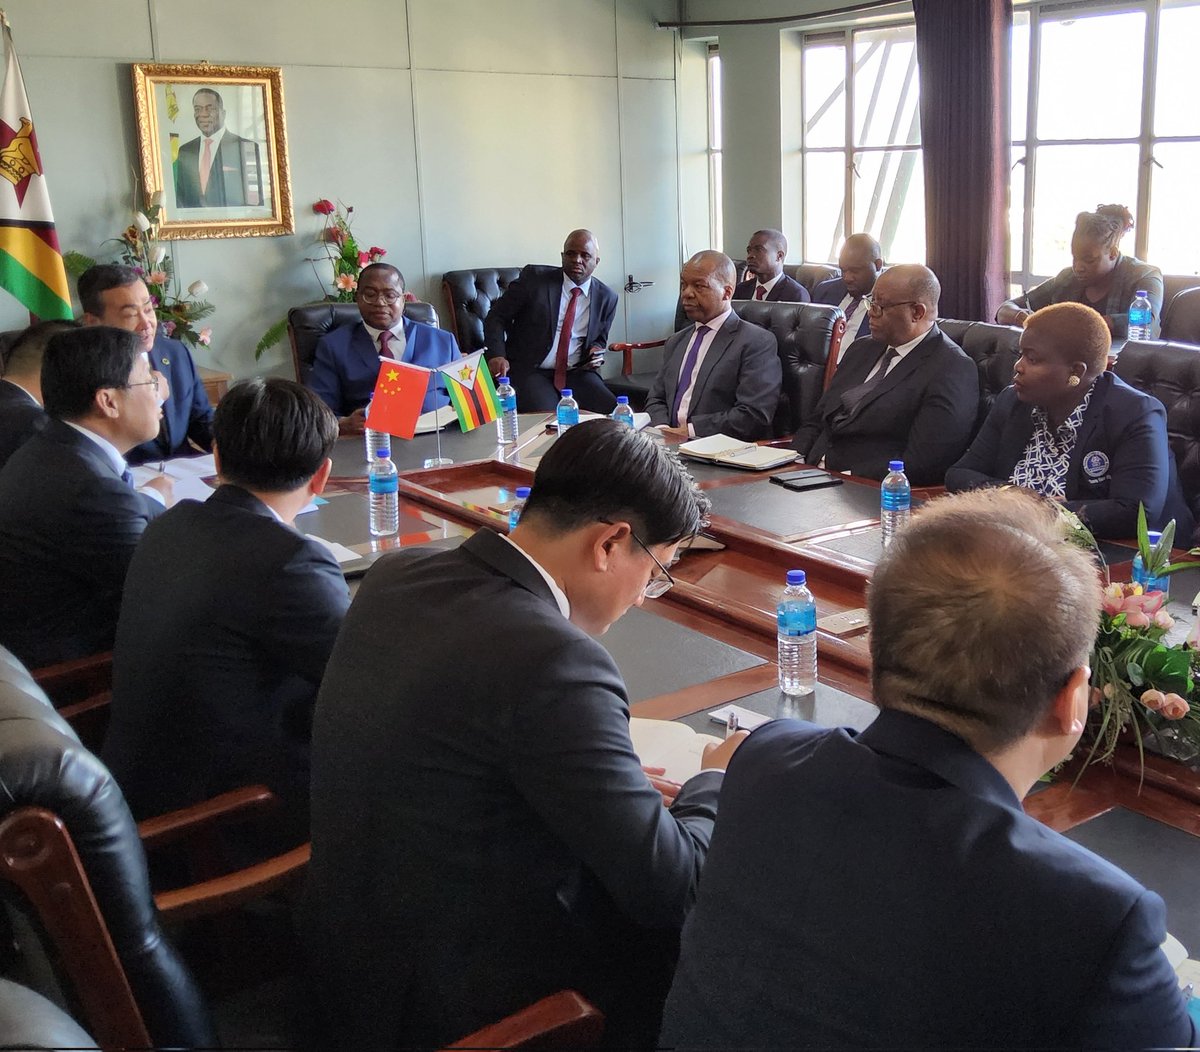 1. The Zimbabwe and Chinese Governments have announced a partnership between China Railway Int Group and the National Railways of Zimbabwe (NRZ) to refurbish and expand Zimbabwe railway network. China Railway Int Group, a subsidiary of China Railway Group Ltd & one of the Fortune